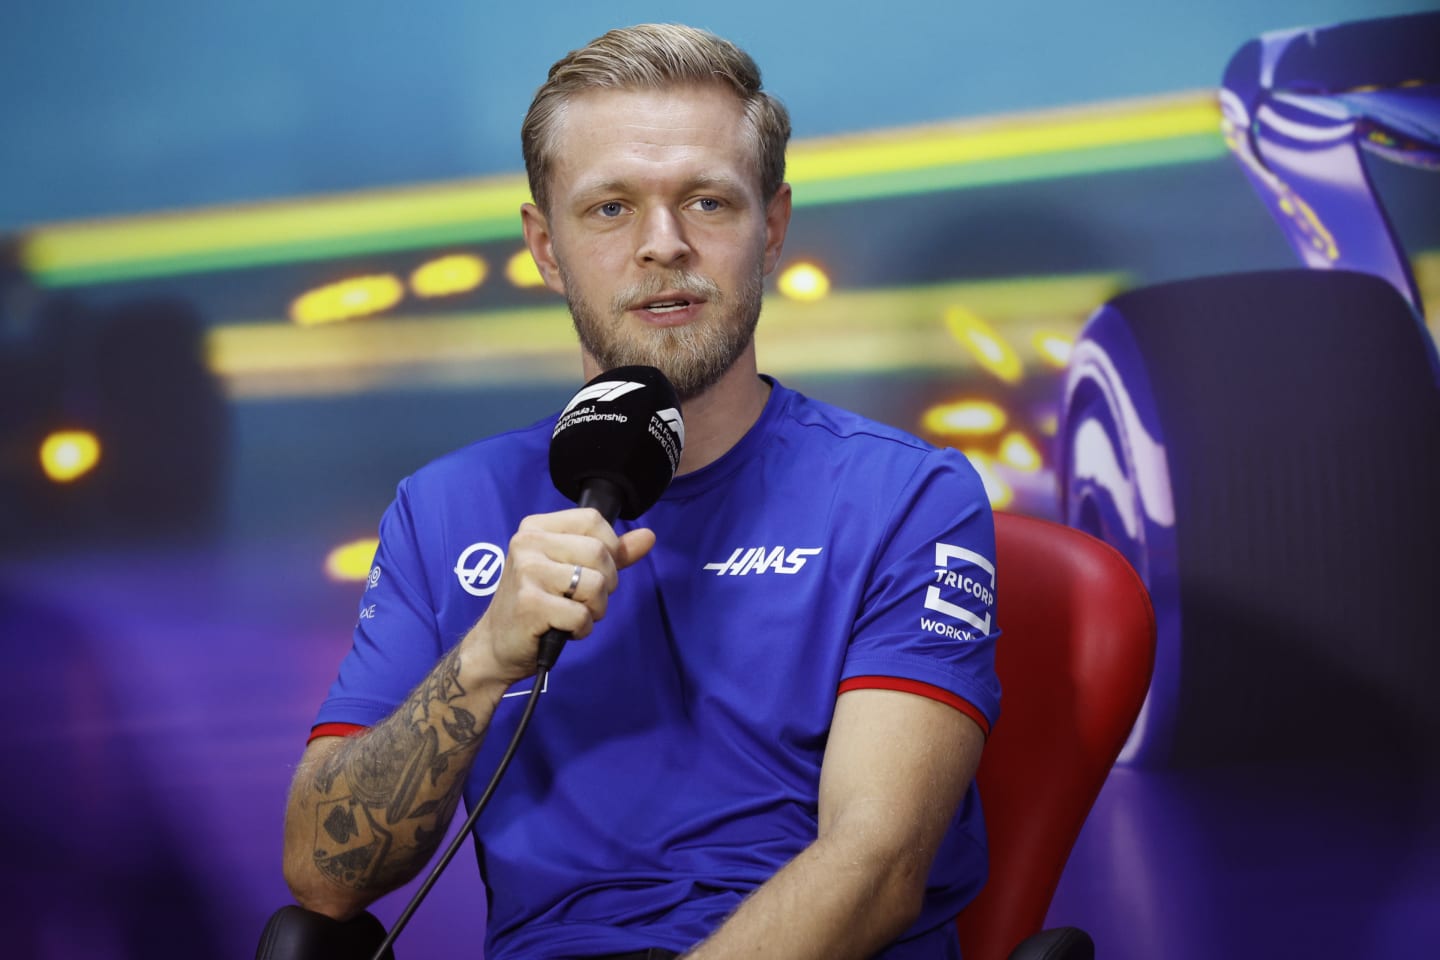 SAO PAULO, BRAZIL - NOVEMBER 10: Kevin Magnussen of Denmark and Haas F1 attends the Drivers Press Conference during previews ahead of the F1 Grand Prix of Brazil at Autodromo Jose Carlos Pace on November 10, 2022 in Sao Paulo, Brazil. (Photo by Jared C. Tilton/Getty Images)